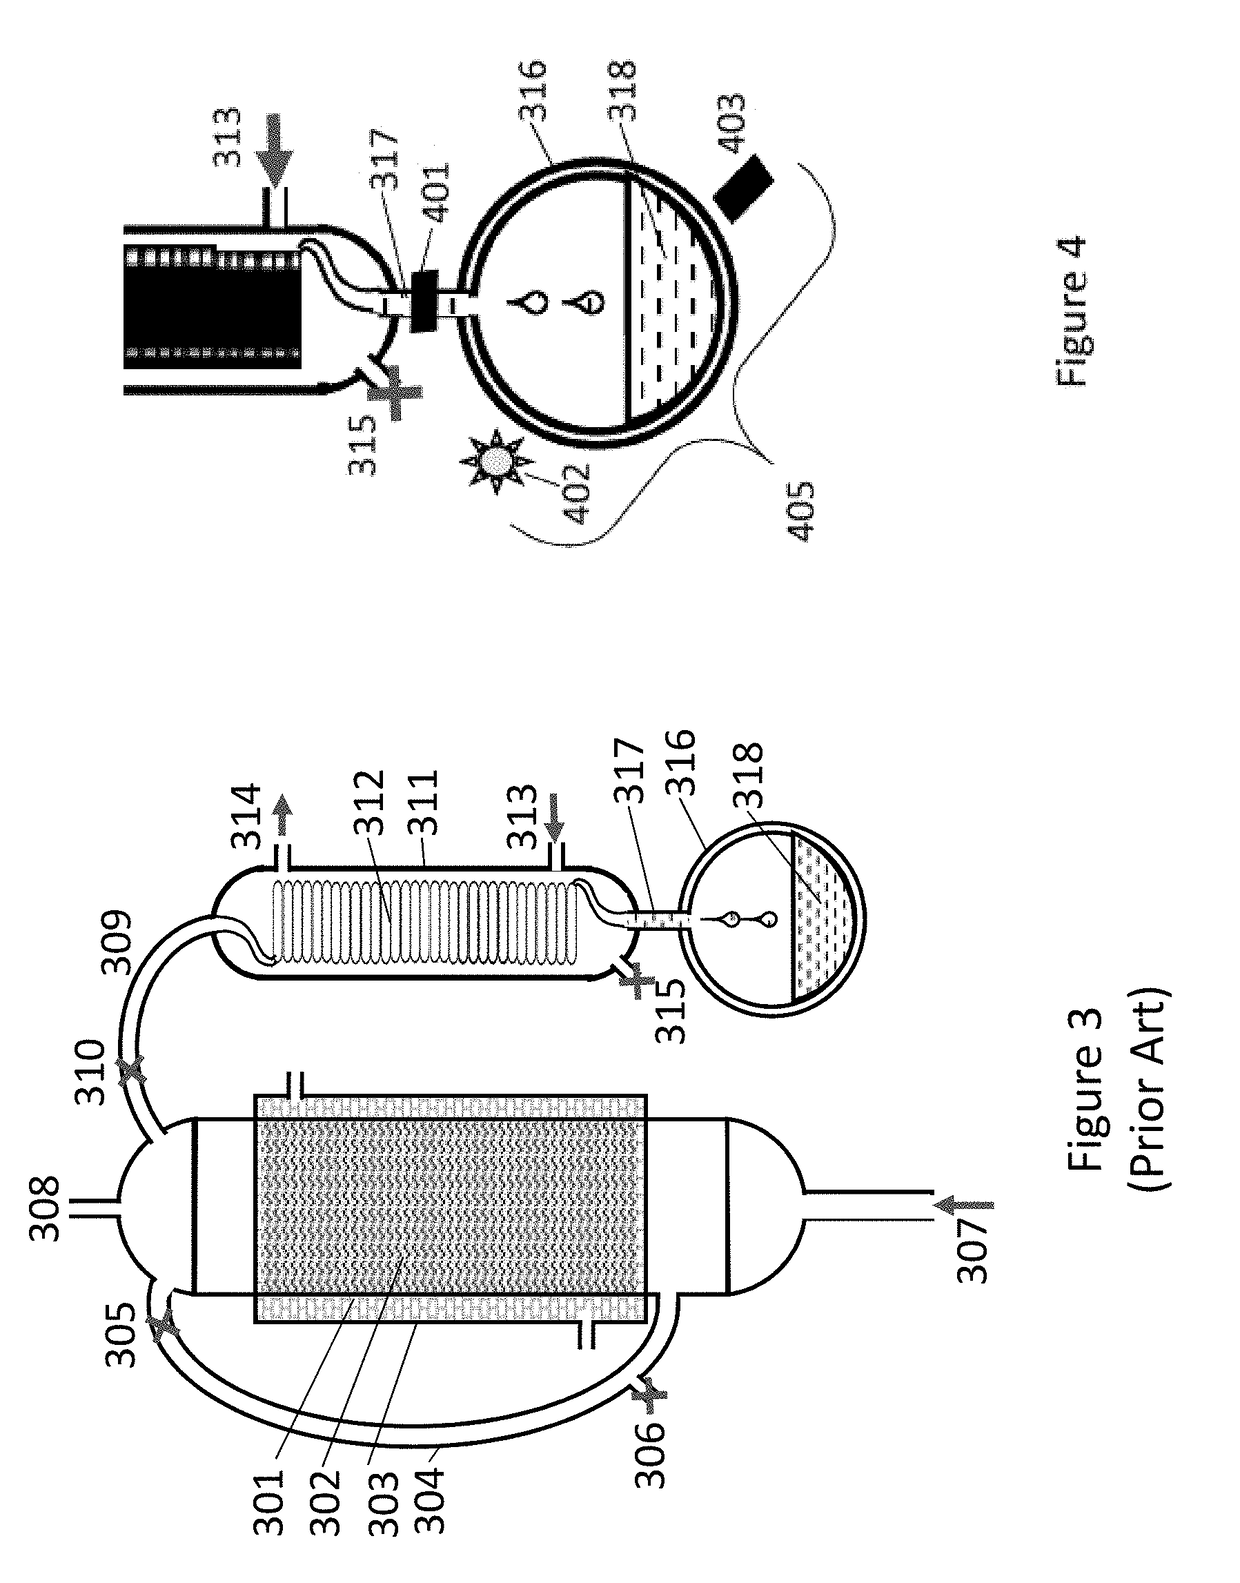 Device, system and method for in-situ optical monitoring and control of extraction and purification of plant materials